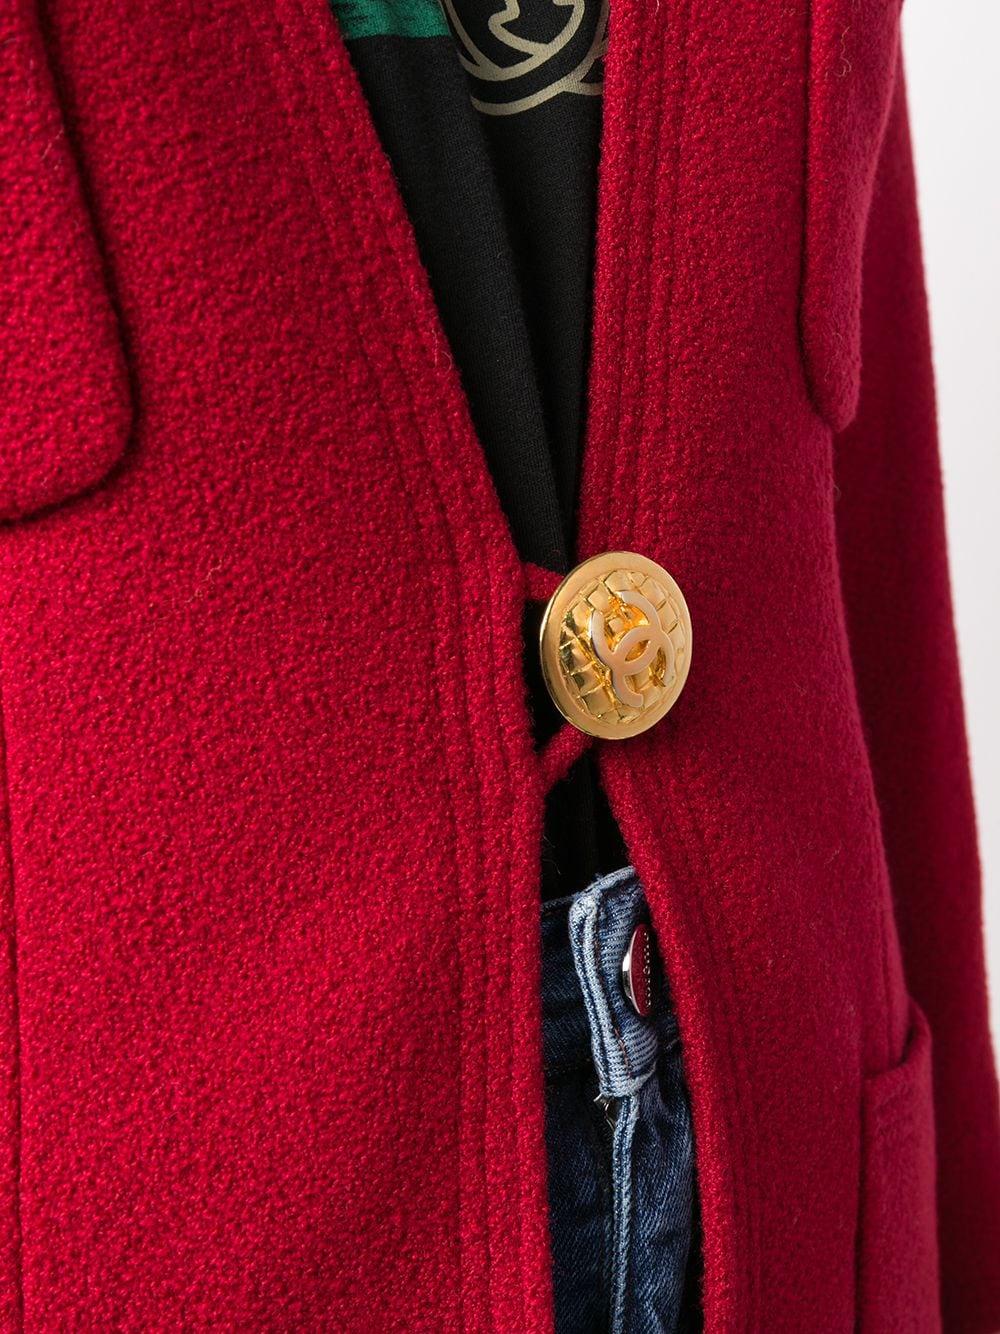 Expertly cut and crafted in France from a striking red wool-blend and a delightful silk lining, this pre-owned, long-sleeved tweed jacket from Chanel showcases the distinct, modern design of wide lapels/ a high standing collar, appliqué detailing